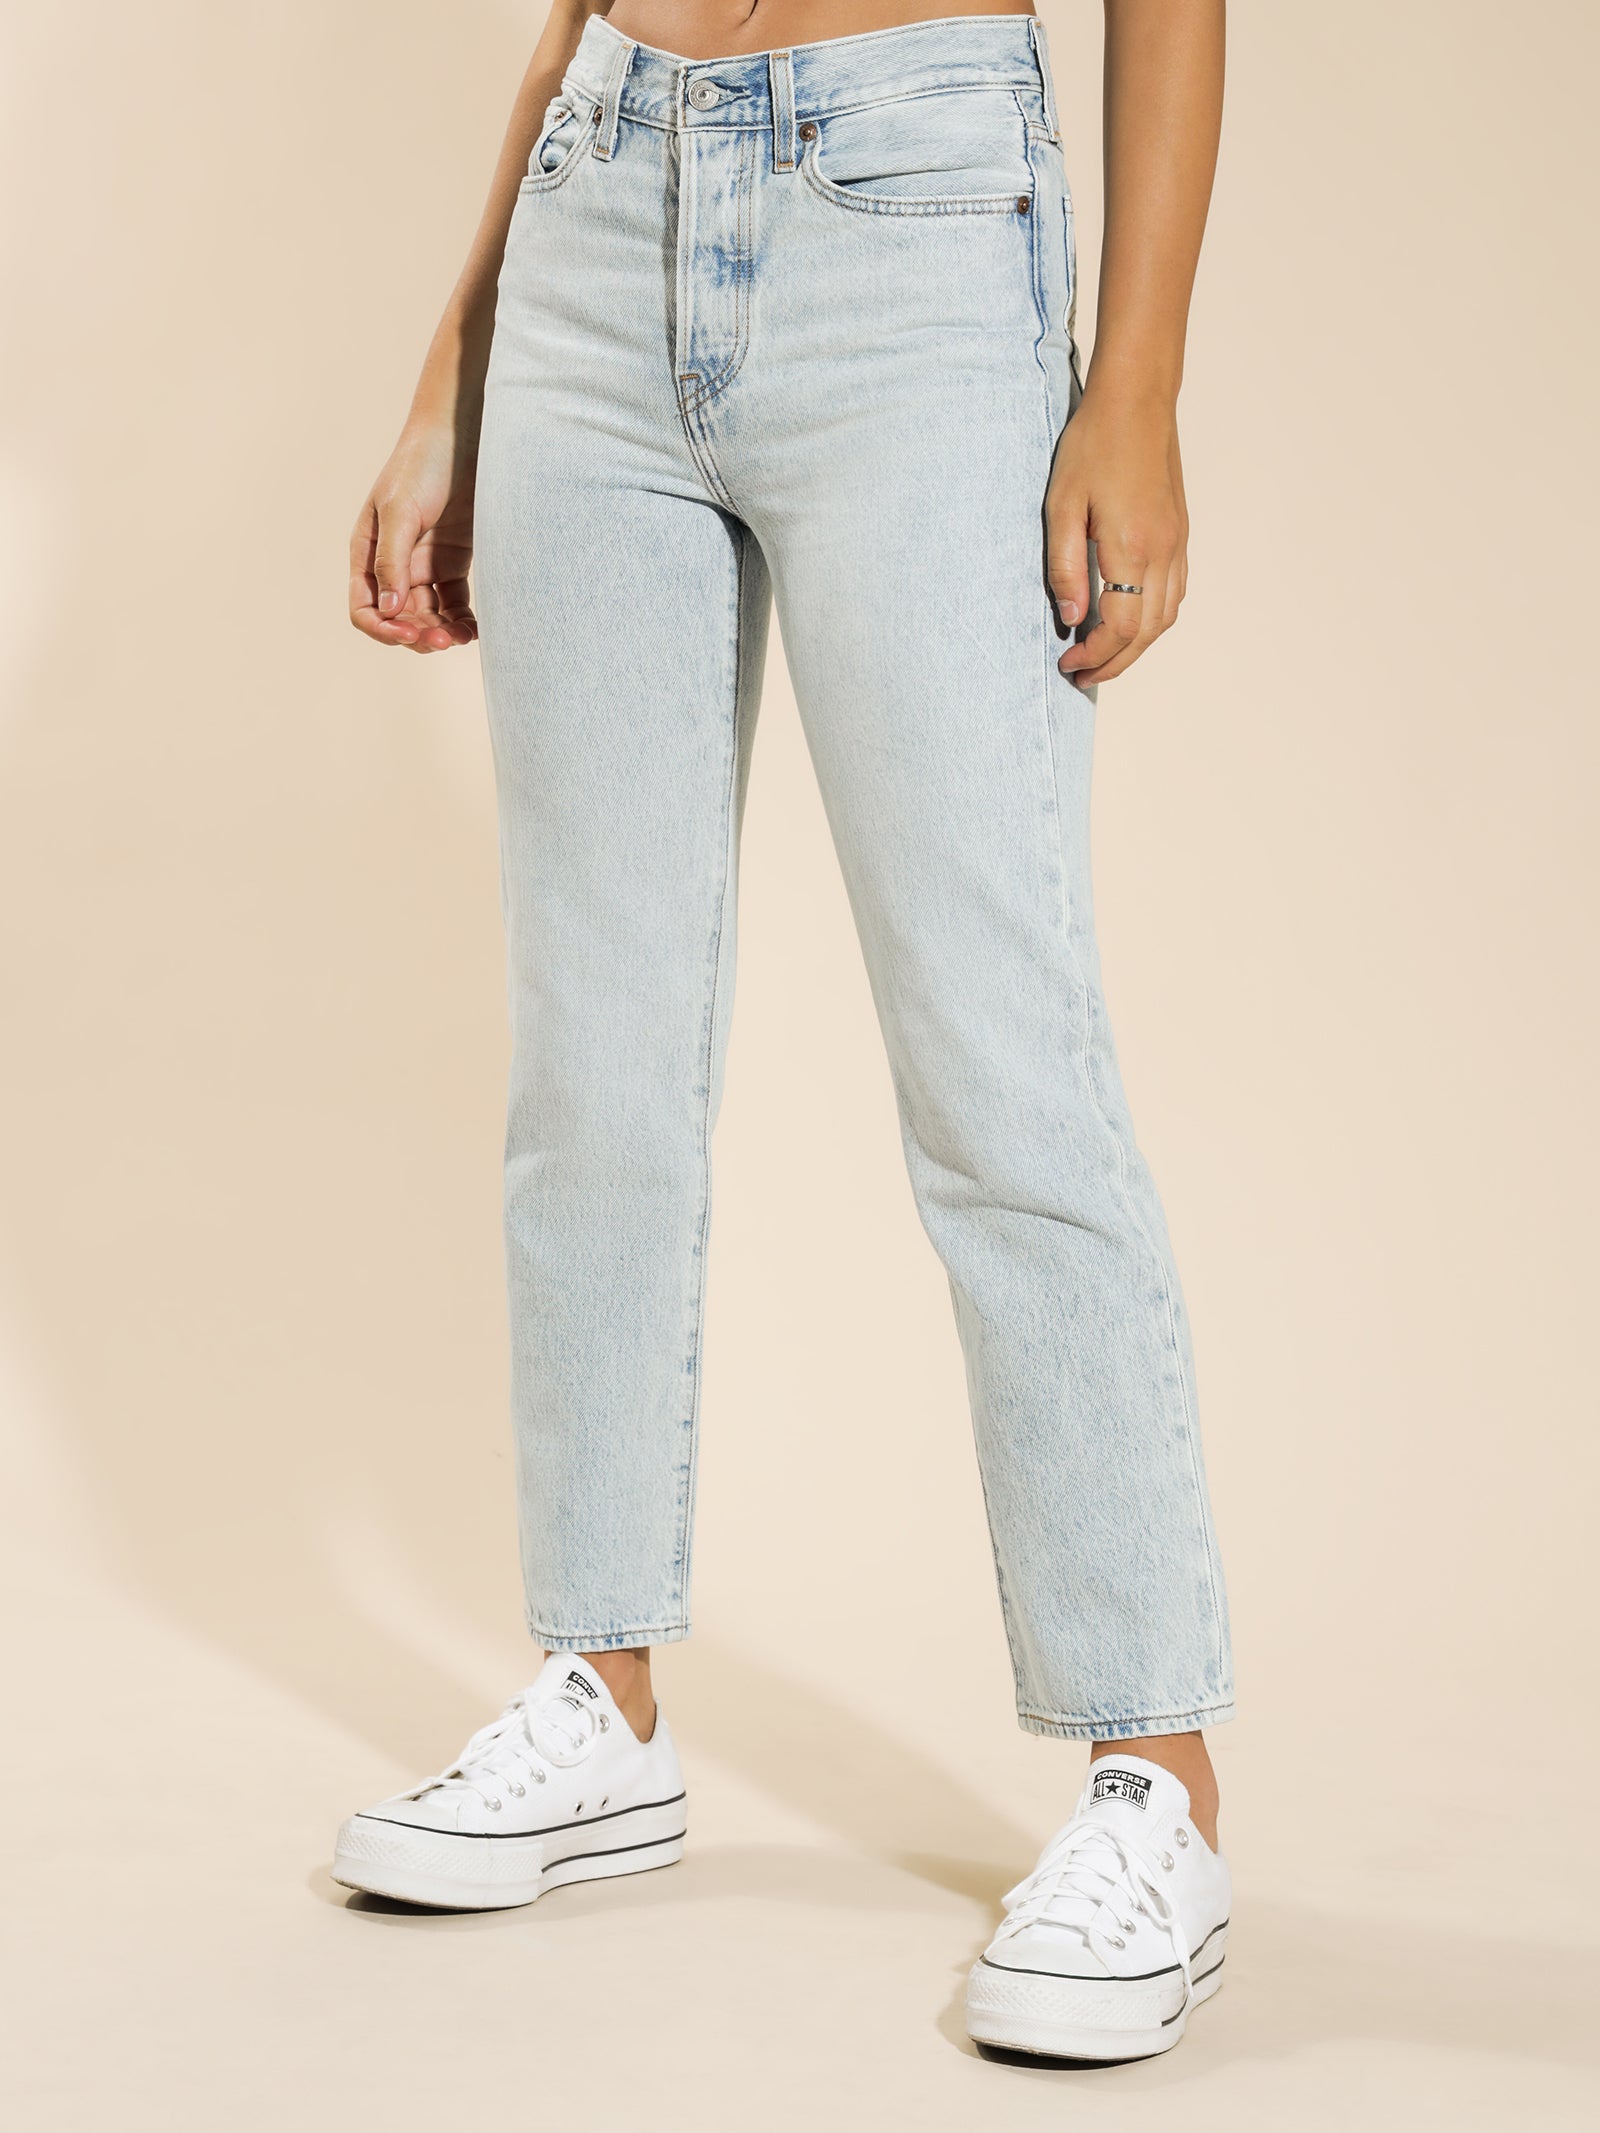 Wedgie Fit Straight Jeans in Montgomery Baked - Glue Store